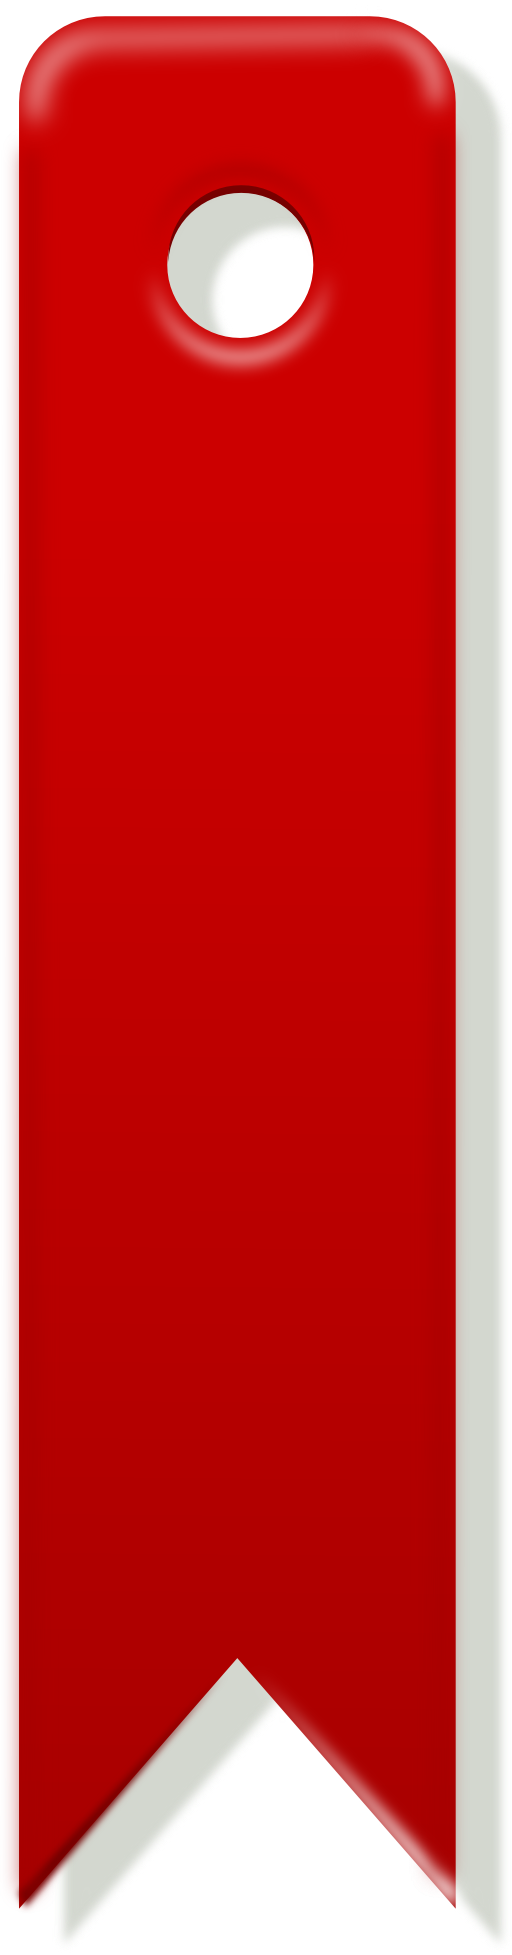 Red Bookmark Clipart i2Clipart Royalty Free Public Domain Clipart